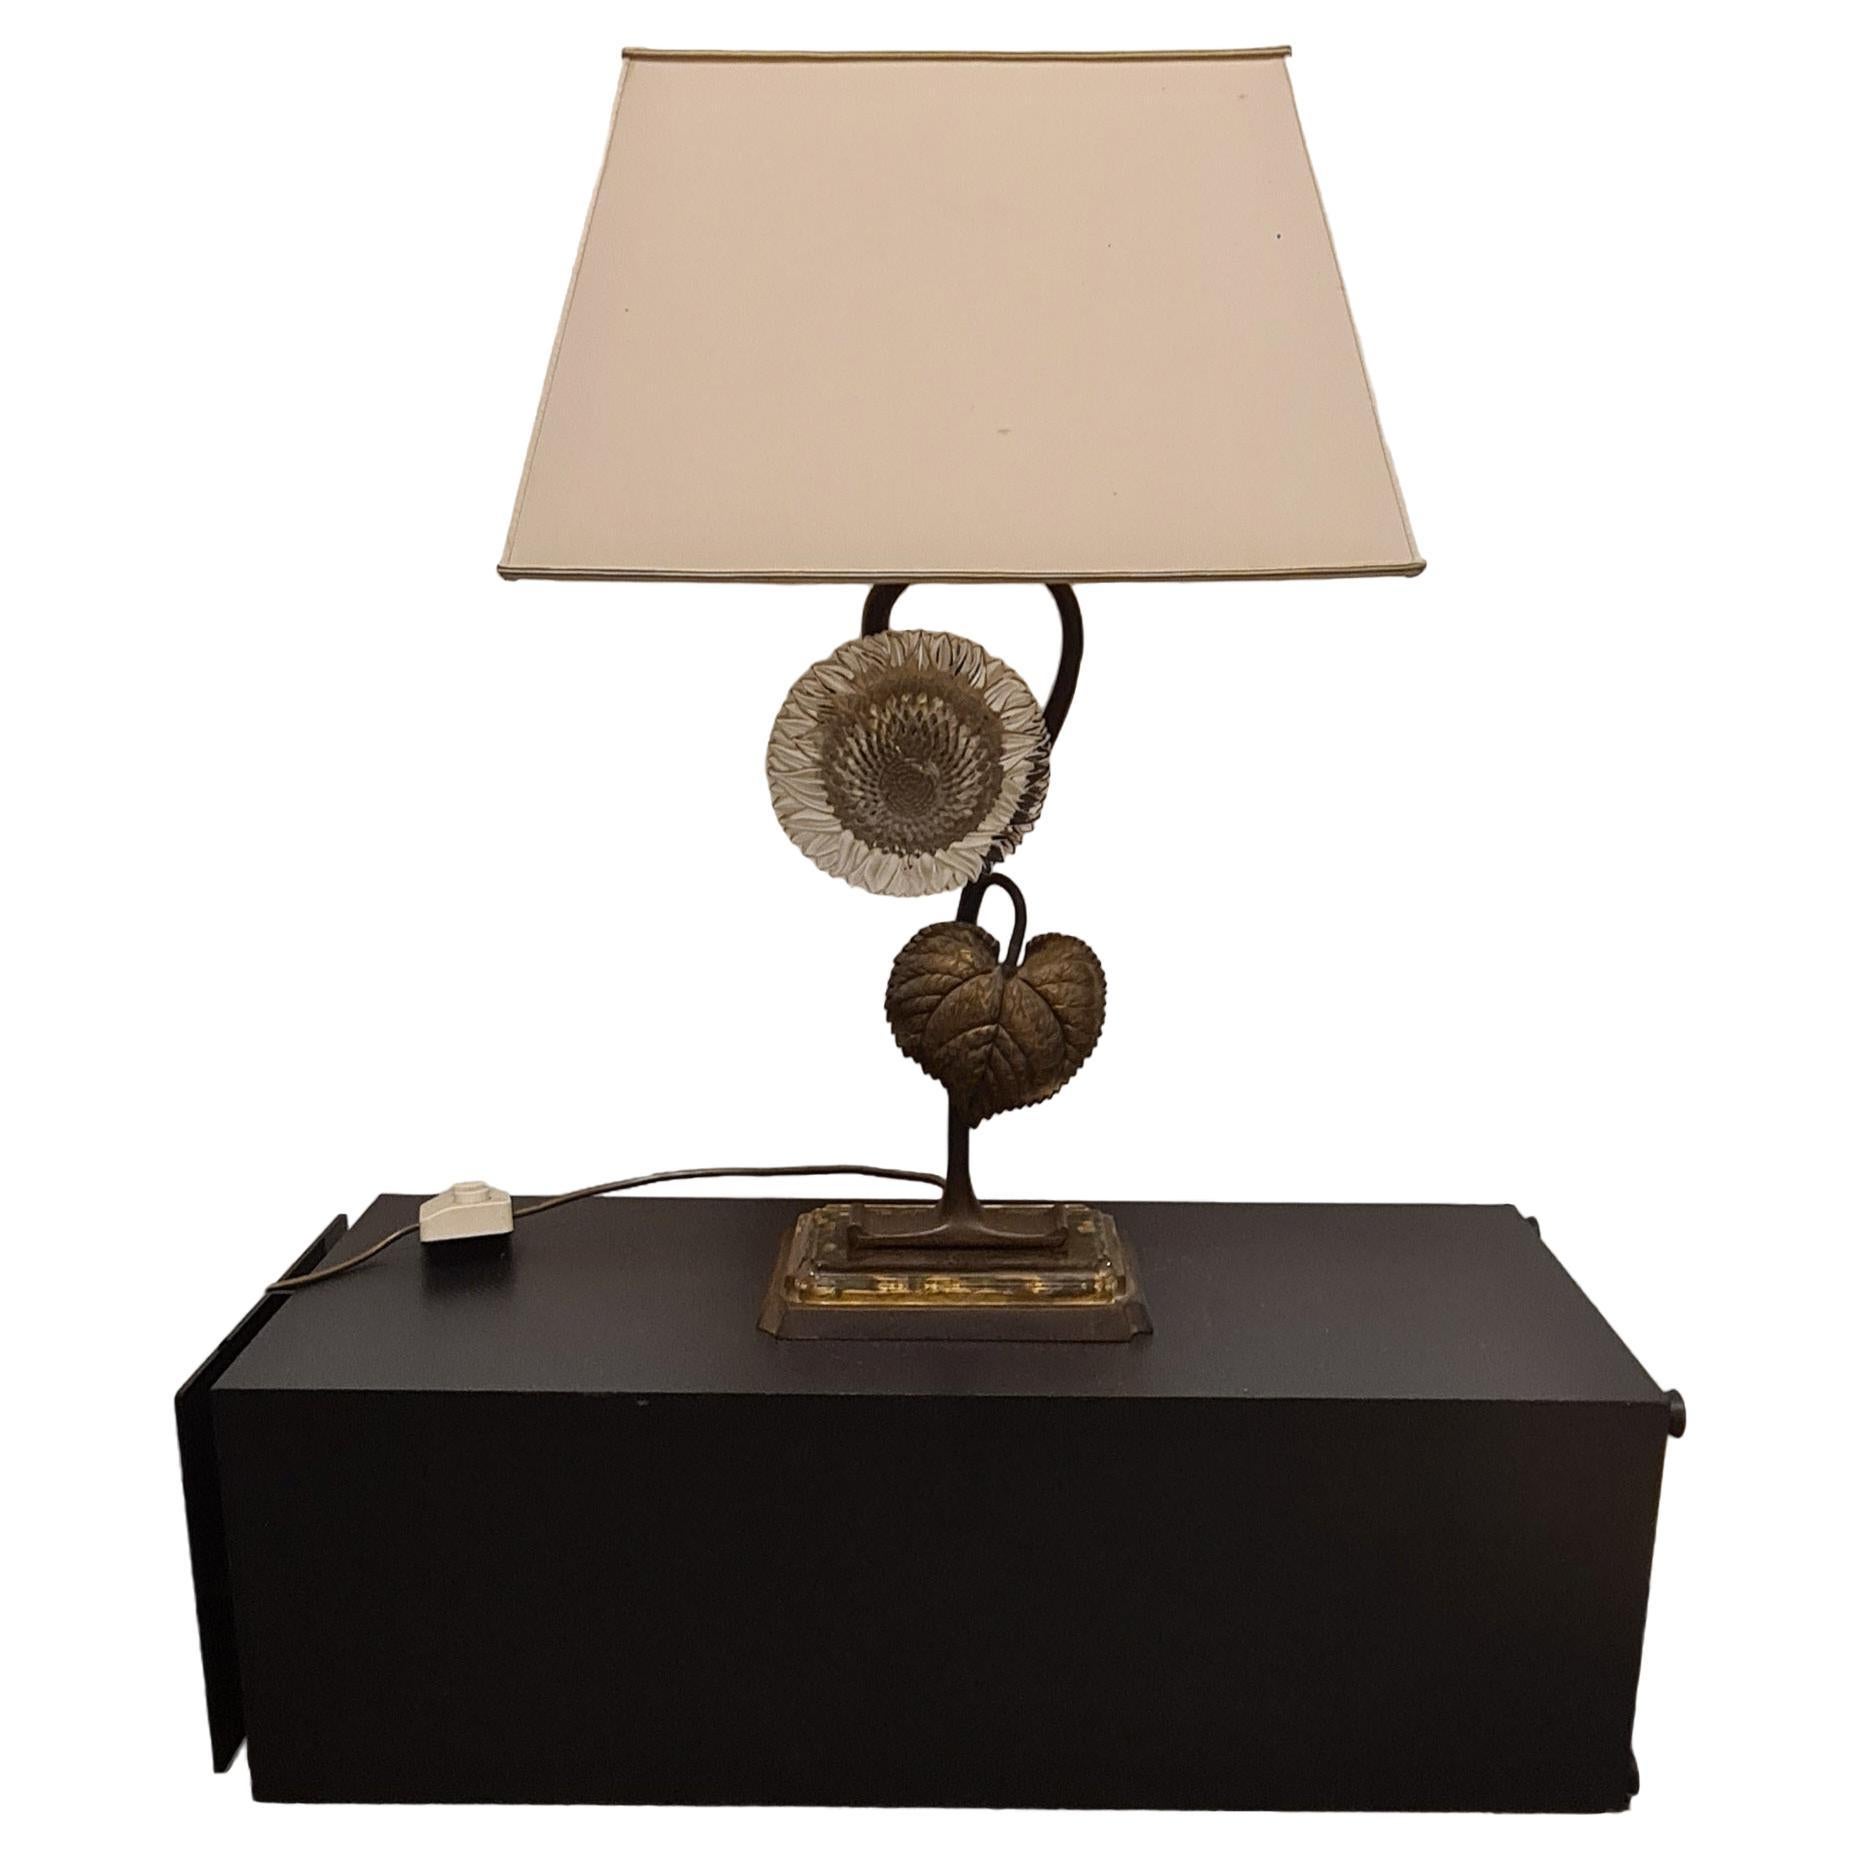 Art nouveau bronze and glass table lamp For Sale